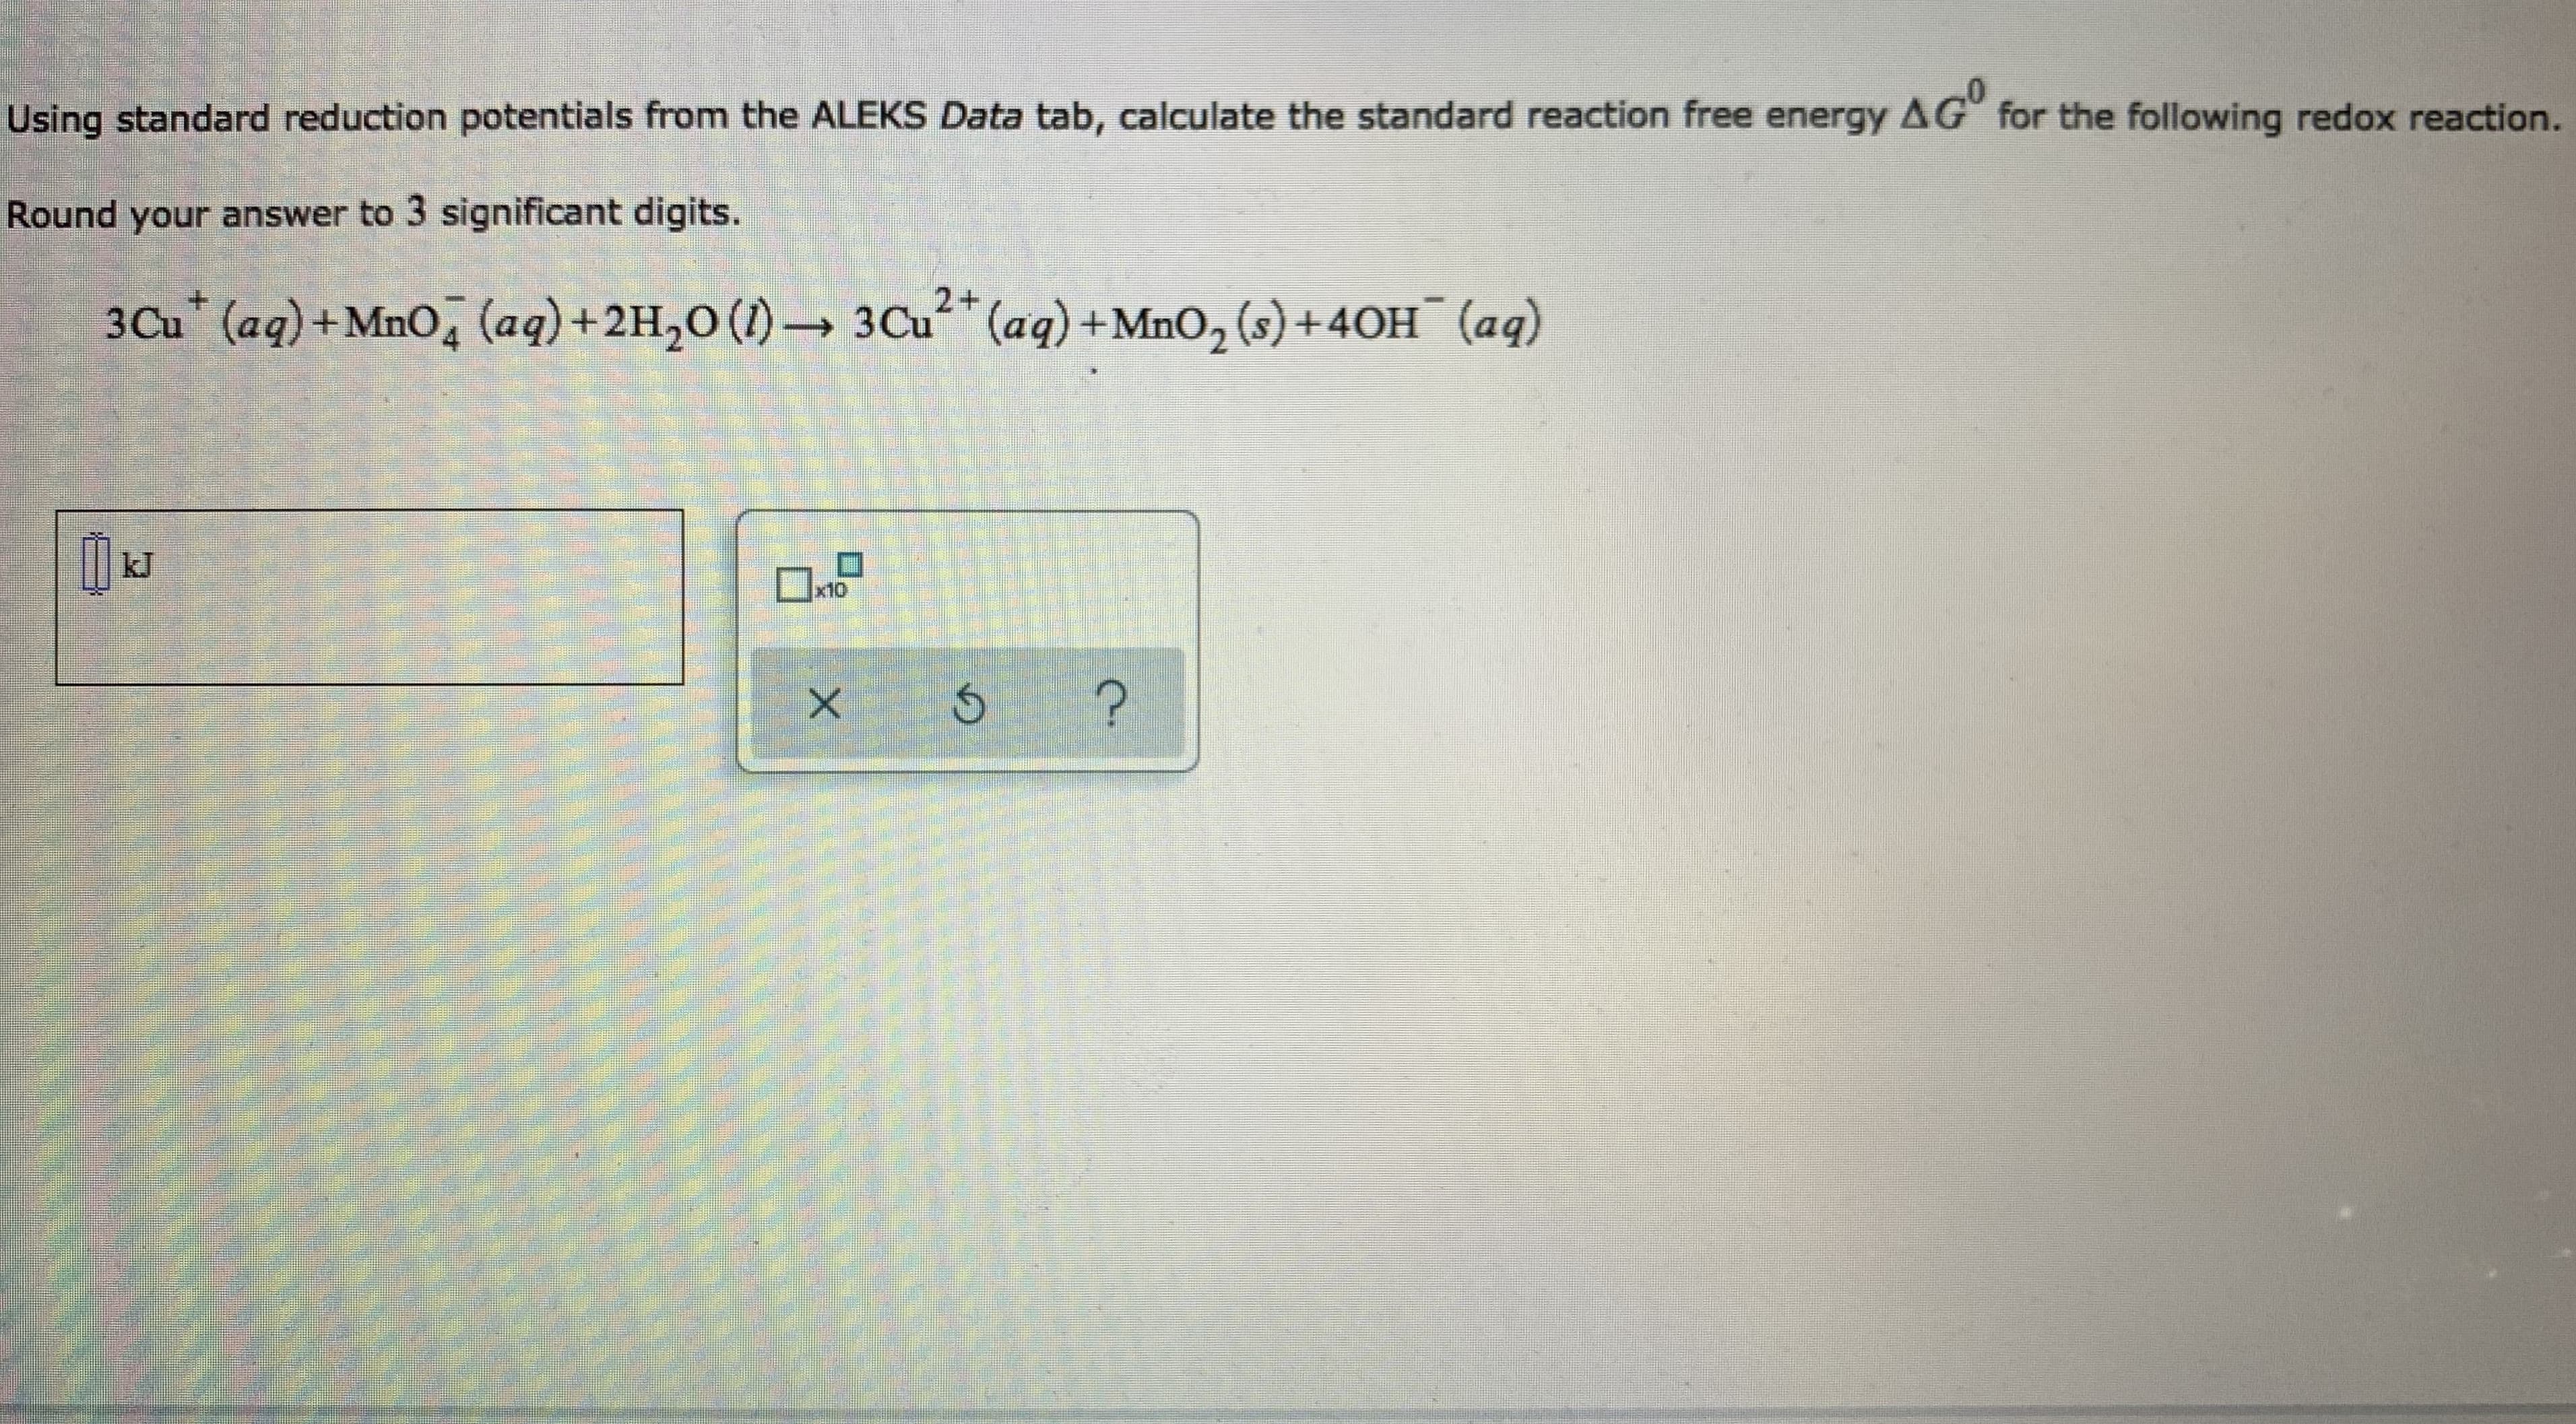 Using standard reduction potentials from the ALEKS Data tab, calculate the standard reaction free energy AG" for the following redox reaction.
Round your answer to 3 significant digits.
2+
3Cu (aq)+MnO, (aq)+2H,0 (1)- 3Cu* (aq) +Mno, (s) +40H¯ (aq)
kJ
Ux10
